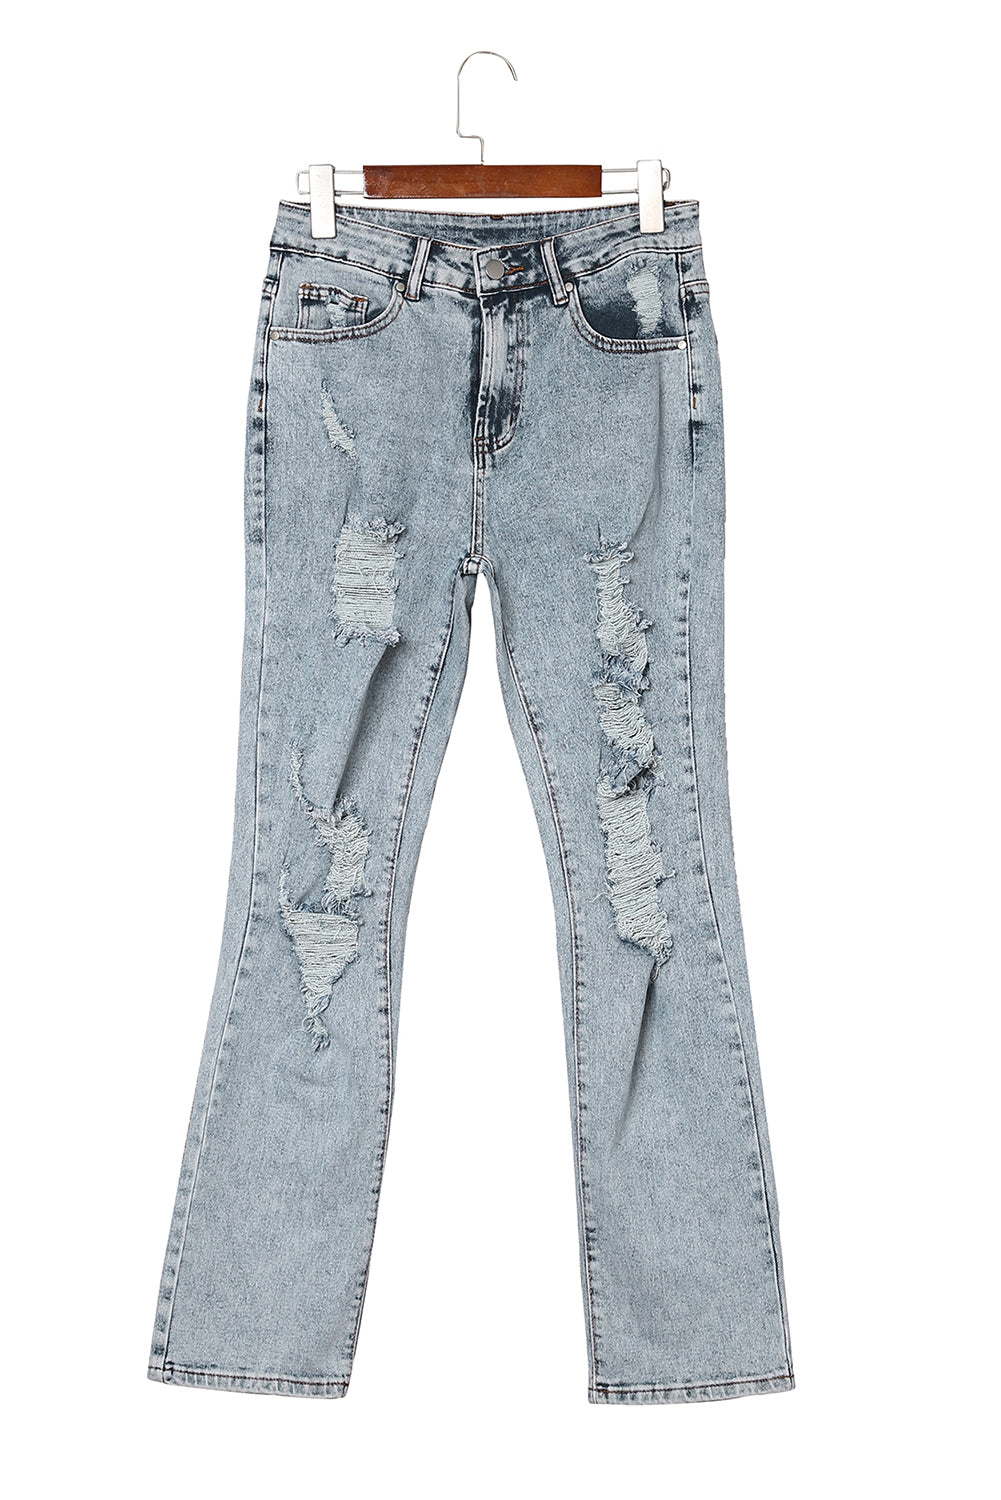 Sky Blue Fading Wash Distressed Casual Jeans Jeans JT's Designer Fashion